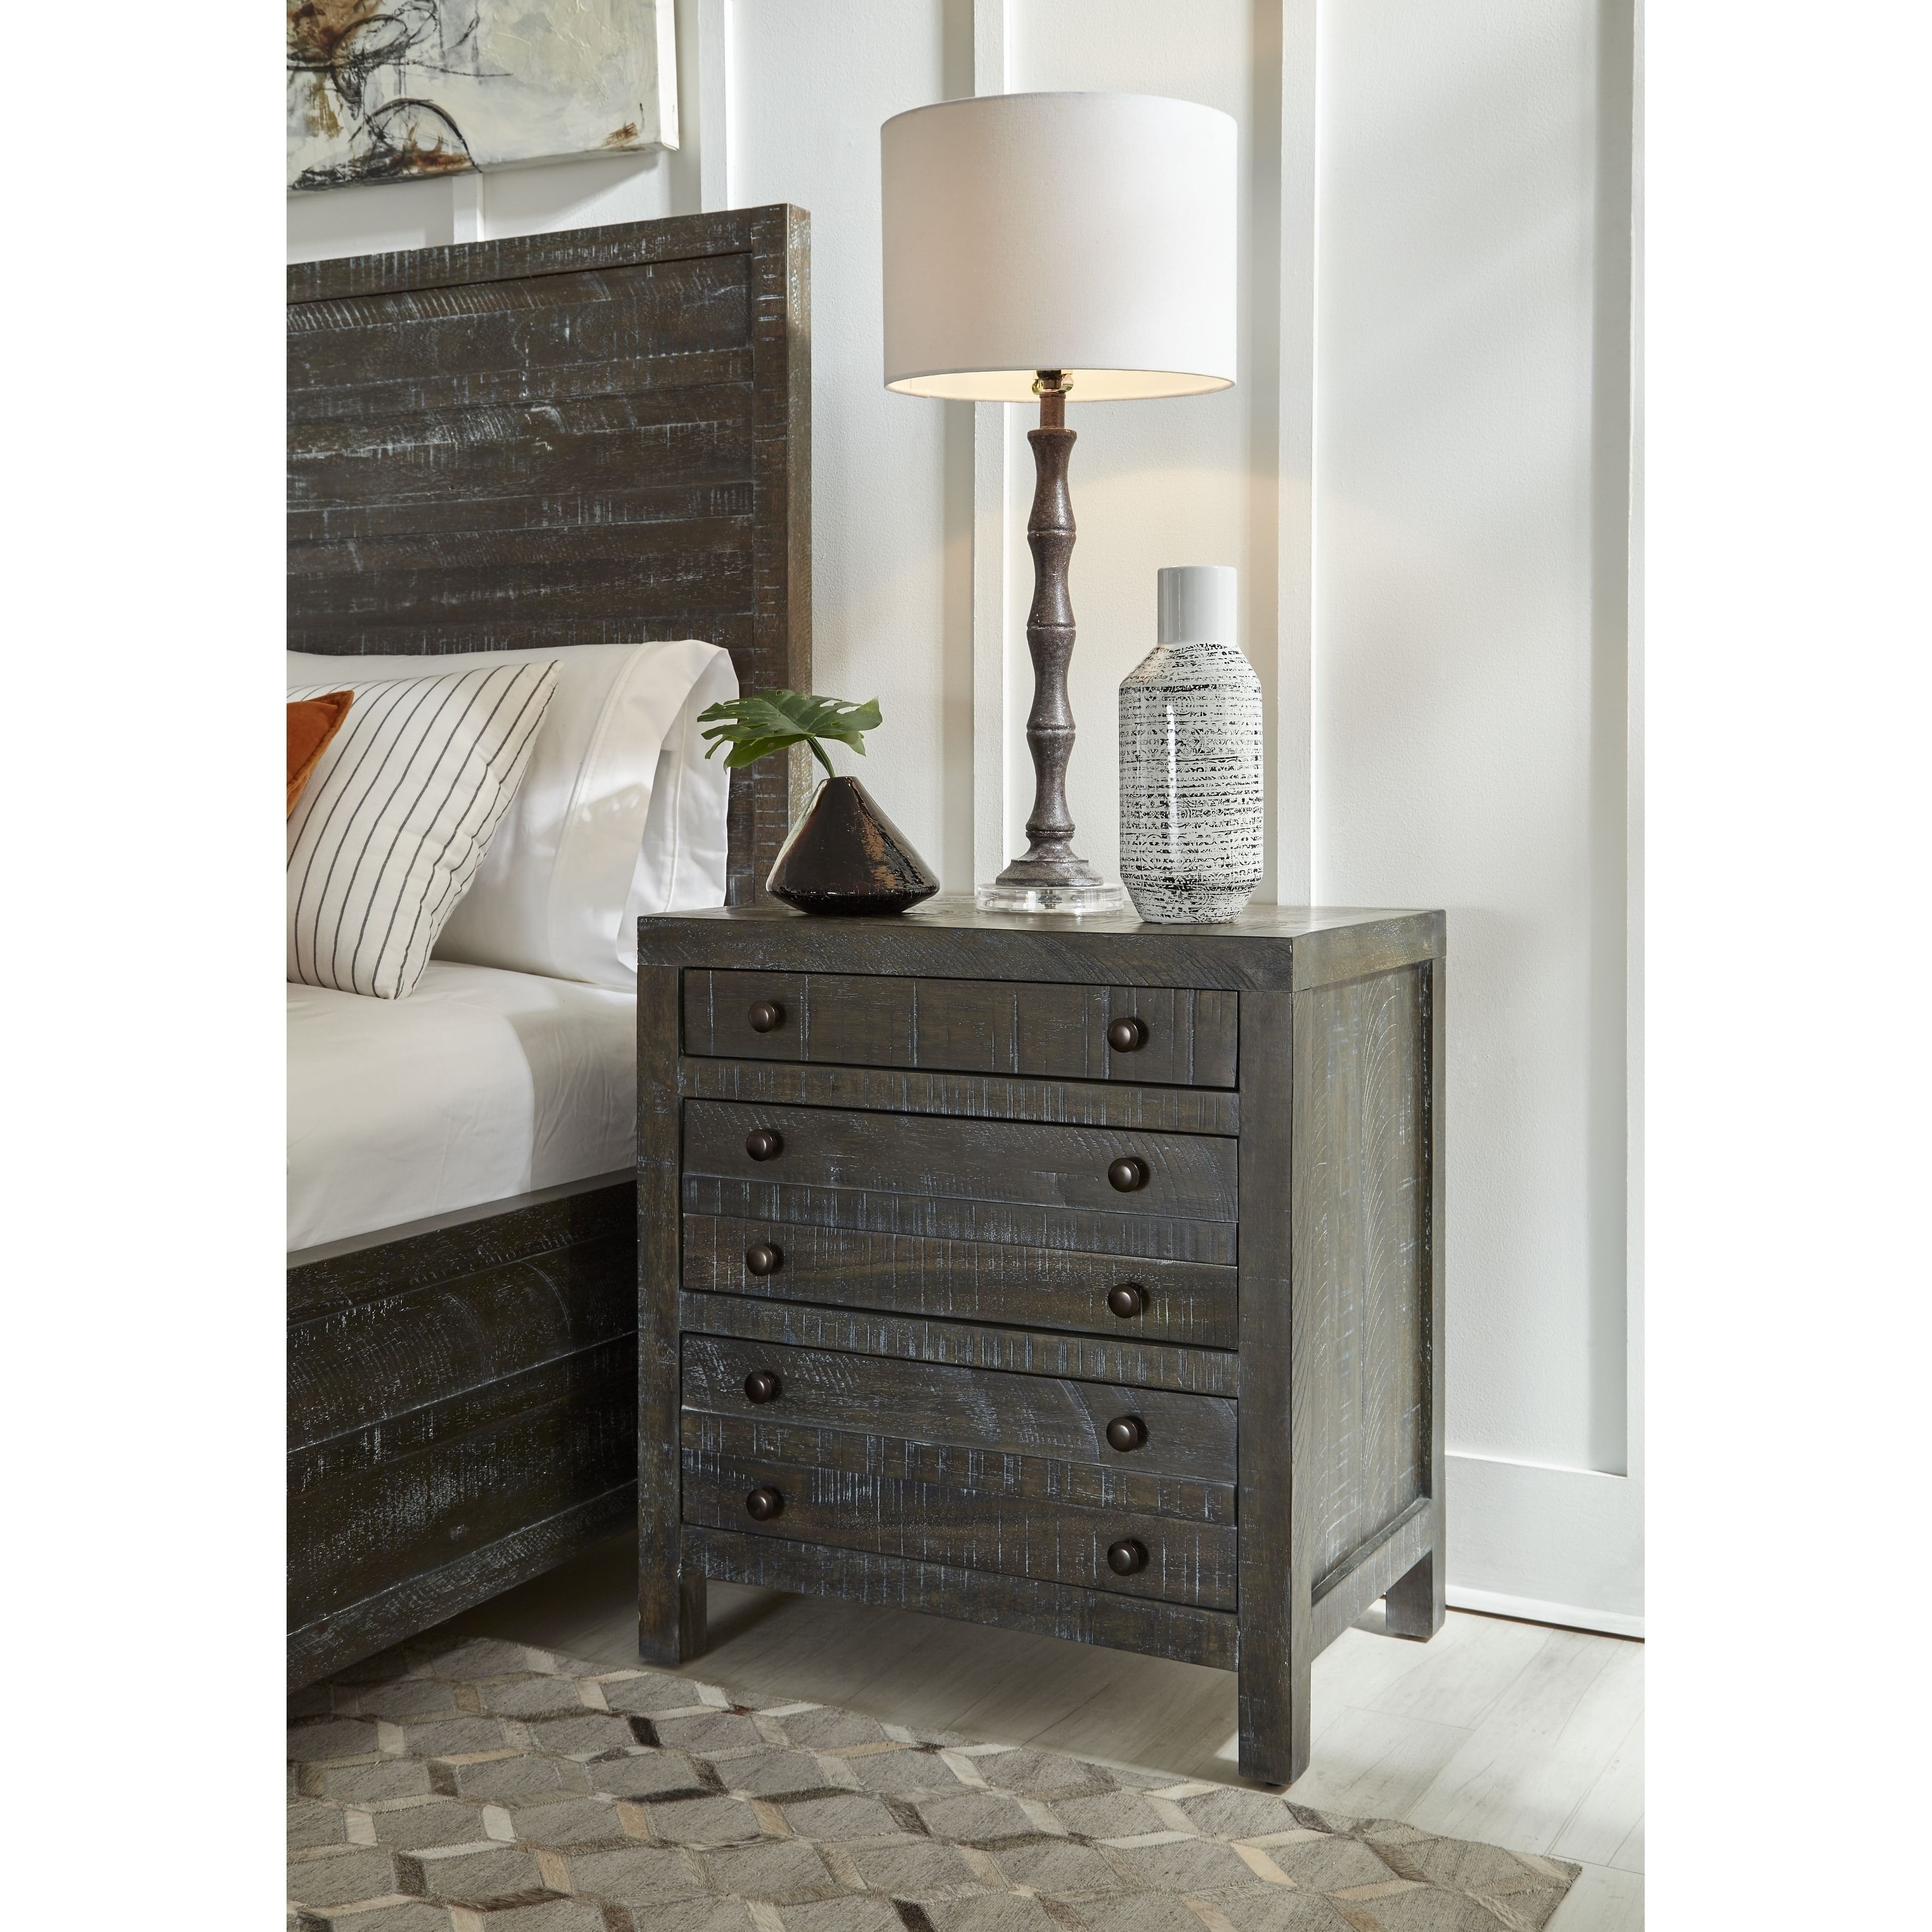 Townsend Solid Wood Three Drawer Nighstand in Gunmetal - image 1 of 5